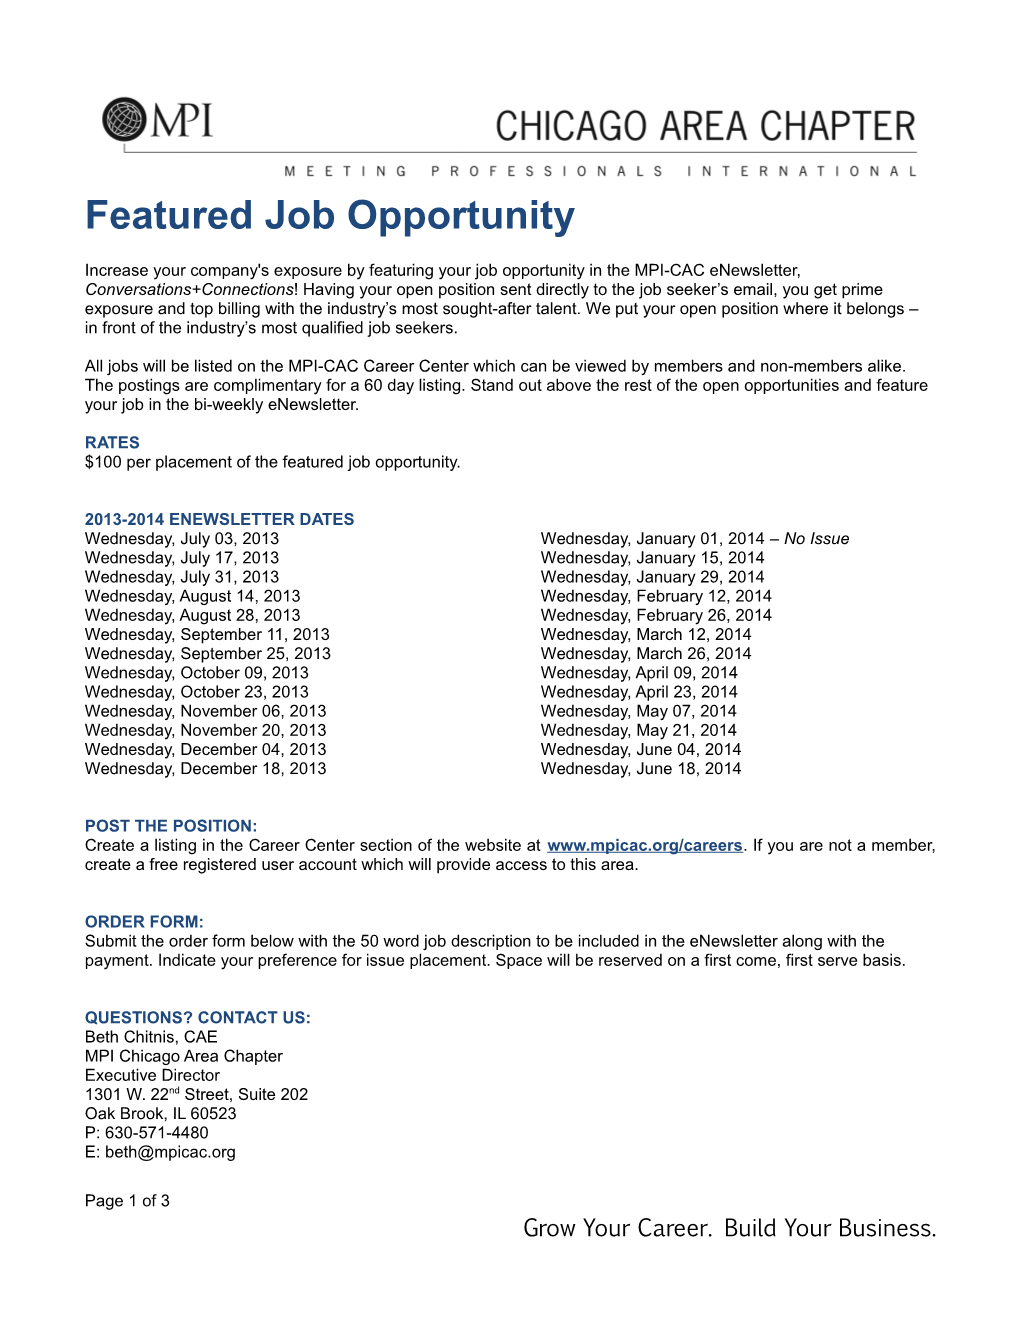 Featured Job Opportunity